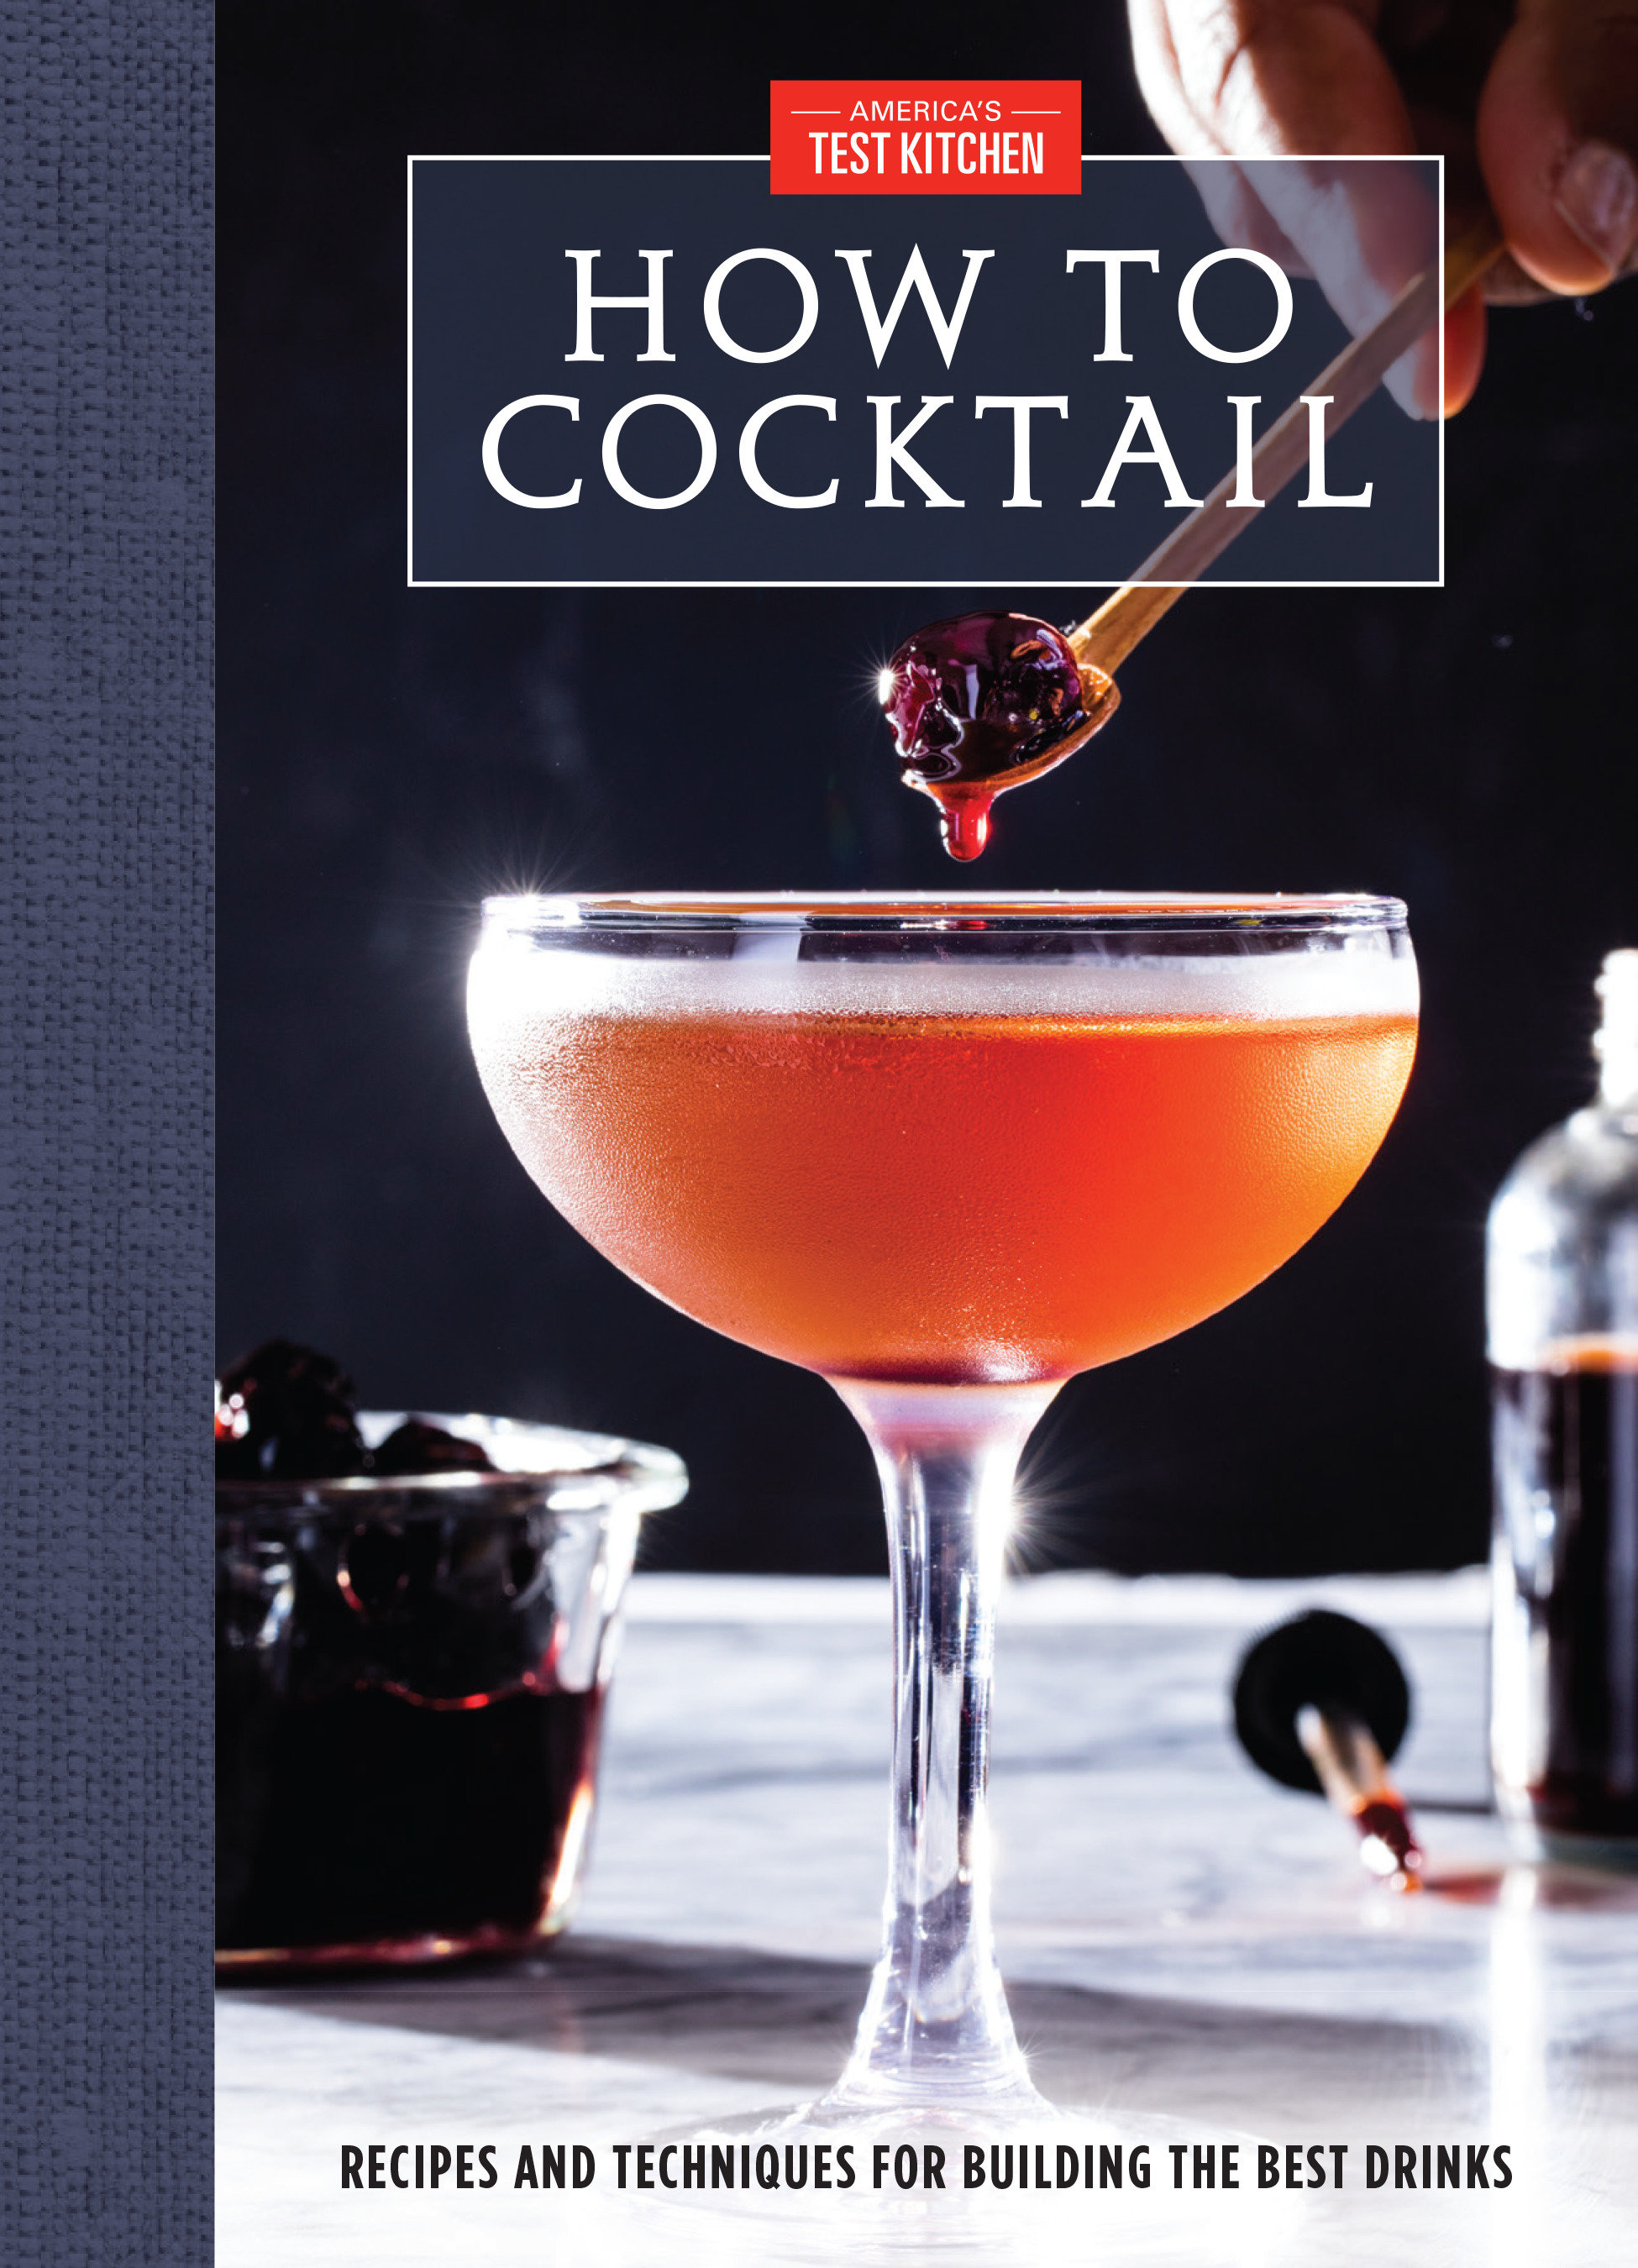 How To Cocktail (Hardcover Book)